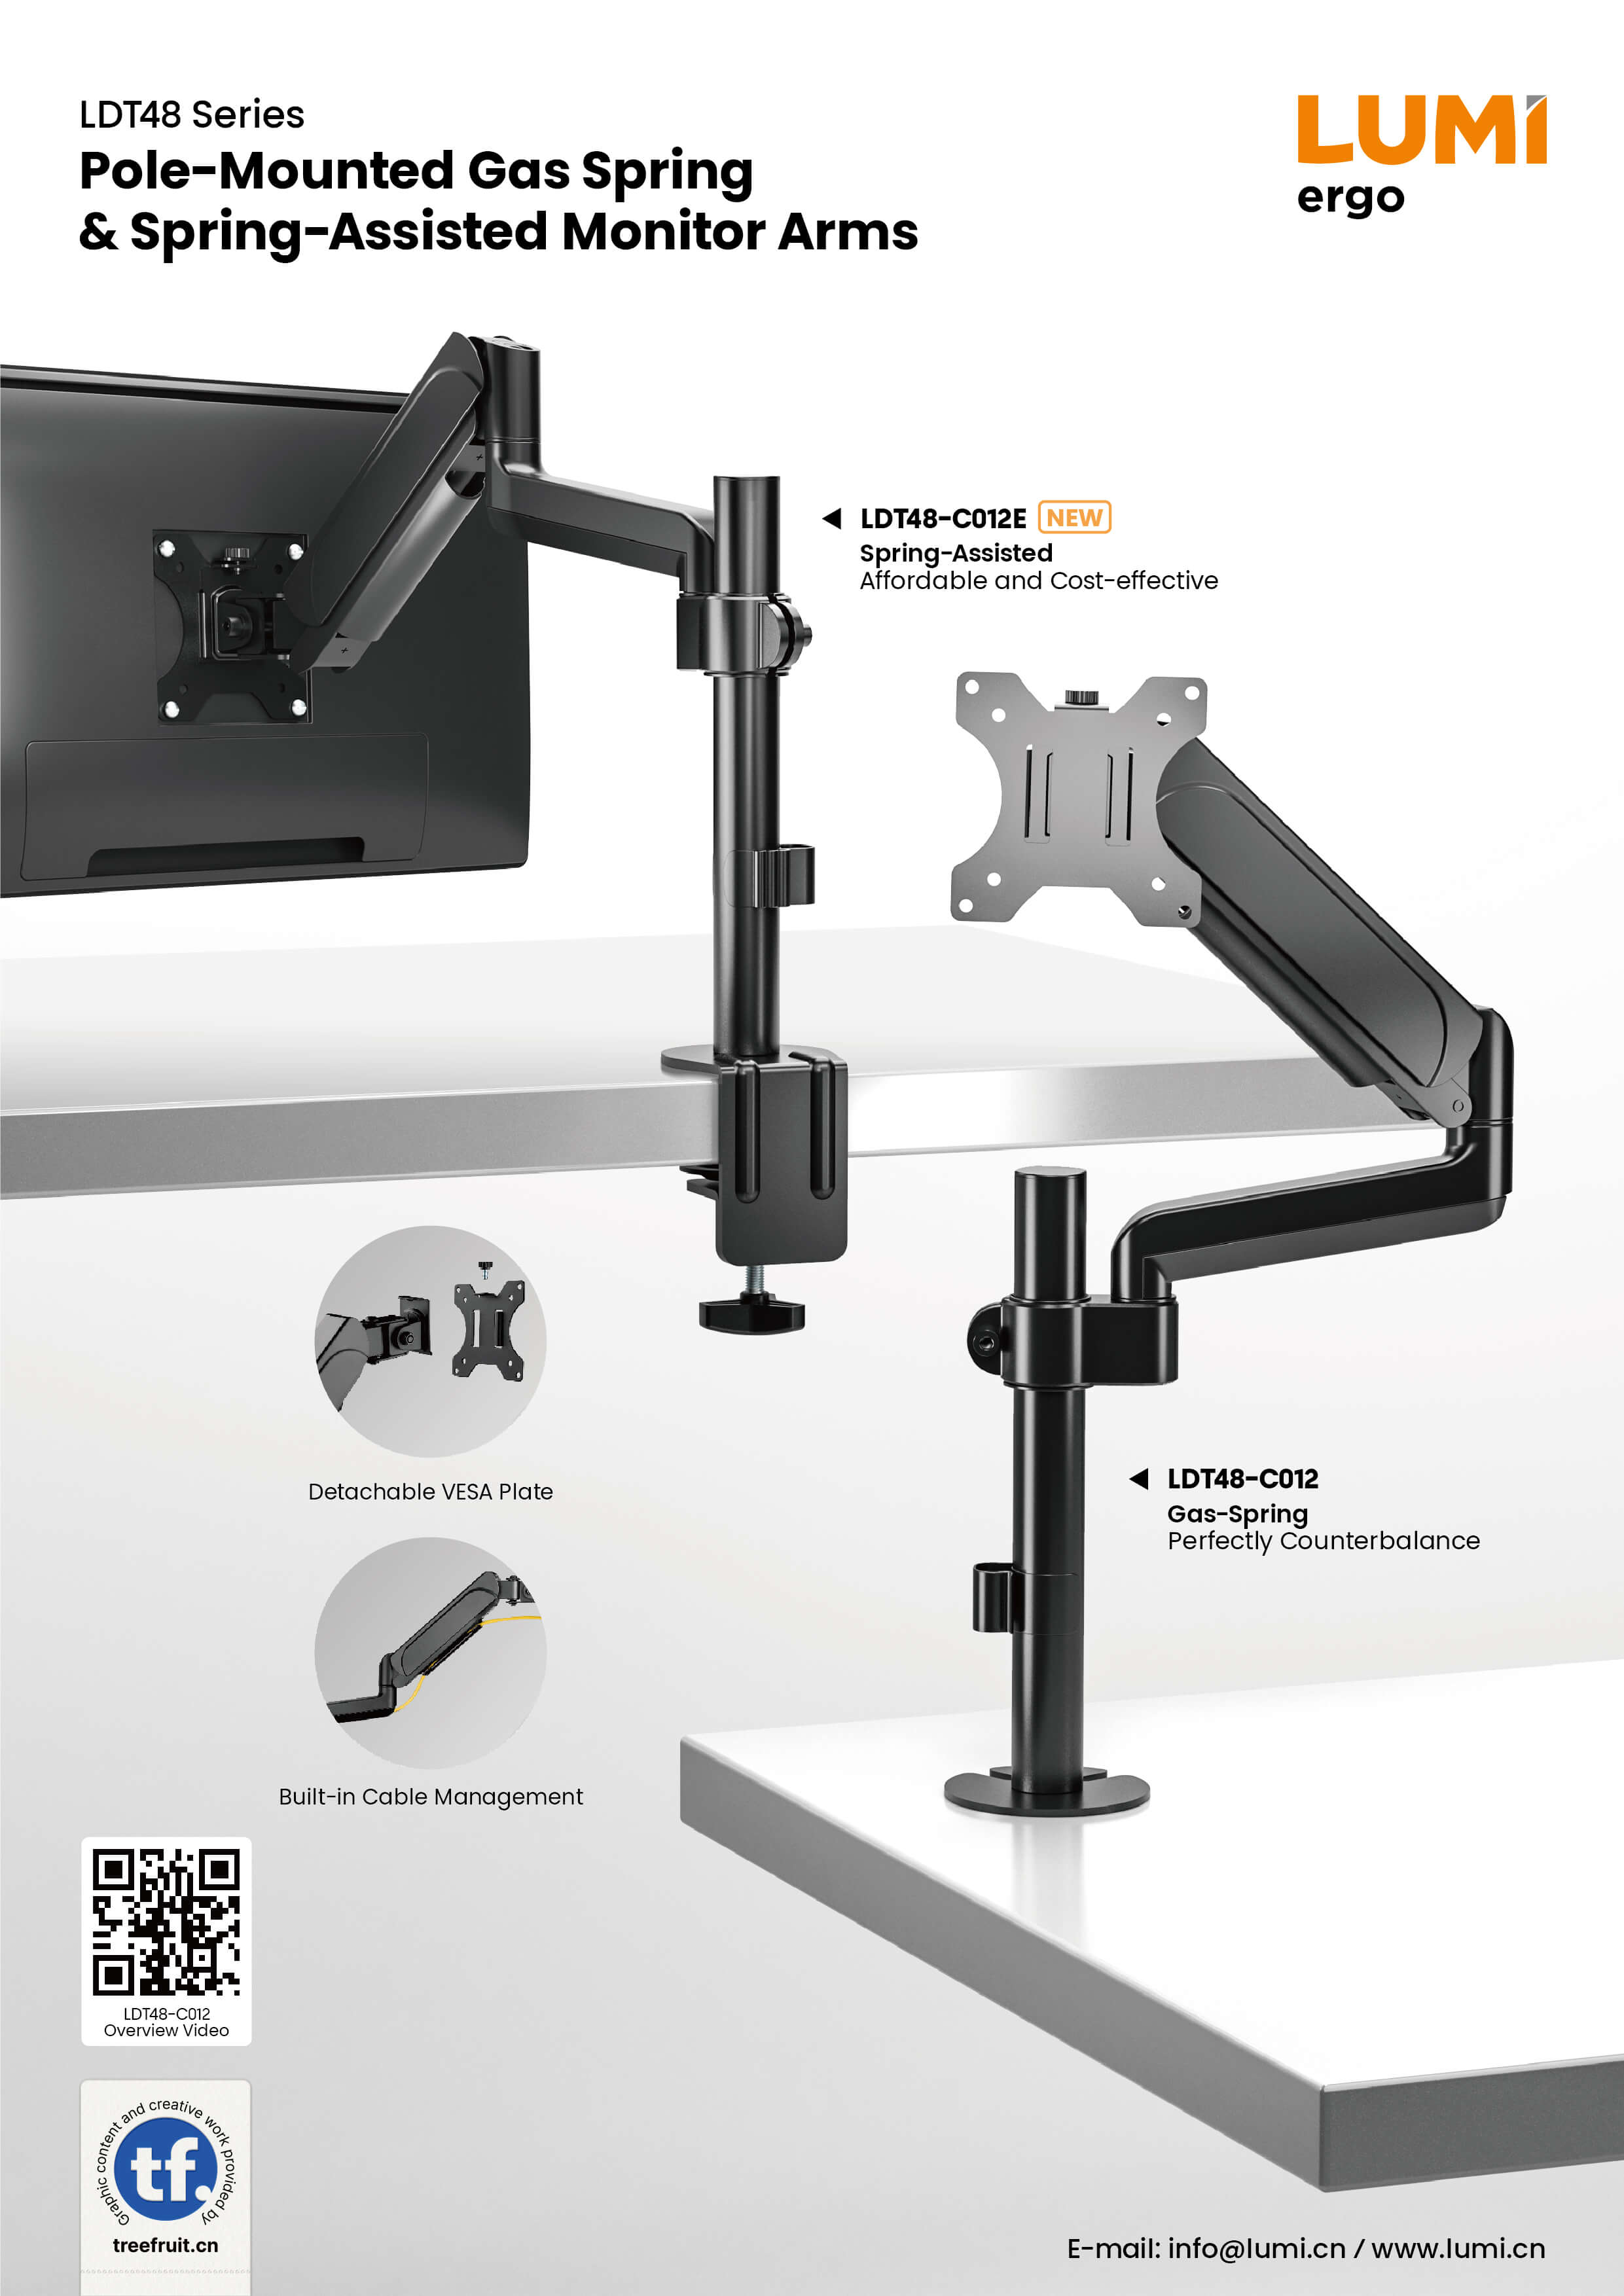 LDT48 Series Pole-Mounted Gas Spring Monitor Arms